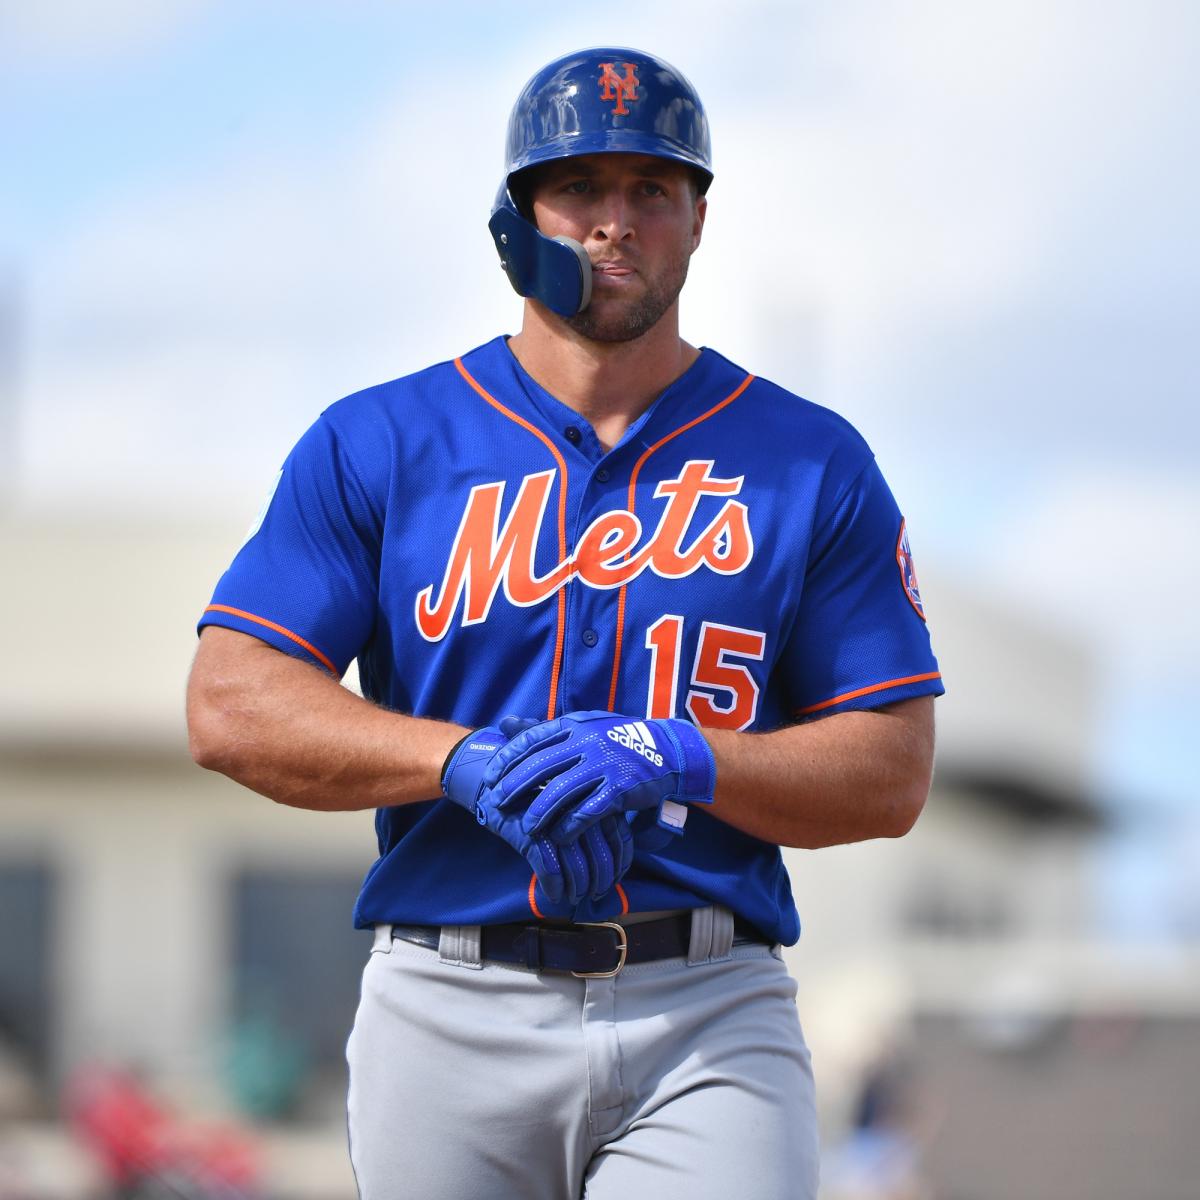 TAKE A LOOK: It's Tim Tebow time in Mets camp, see the outfield